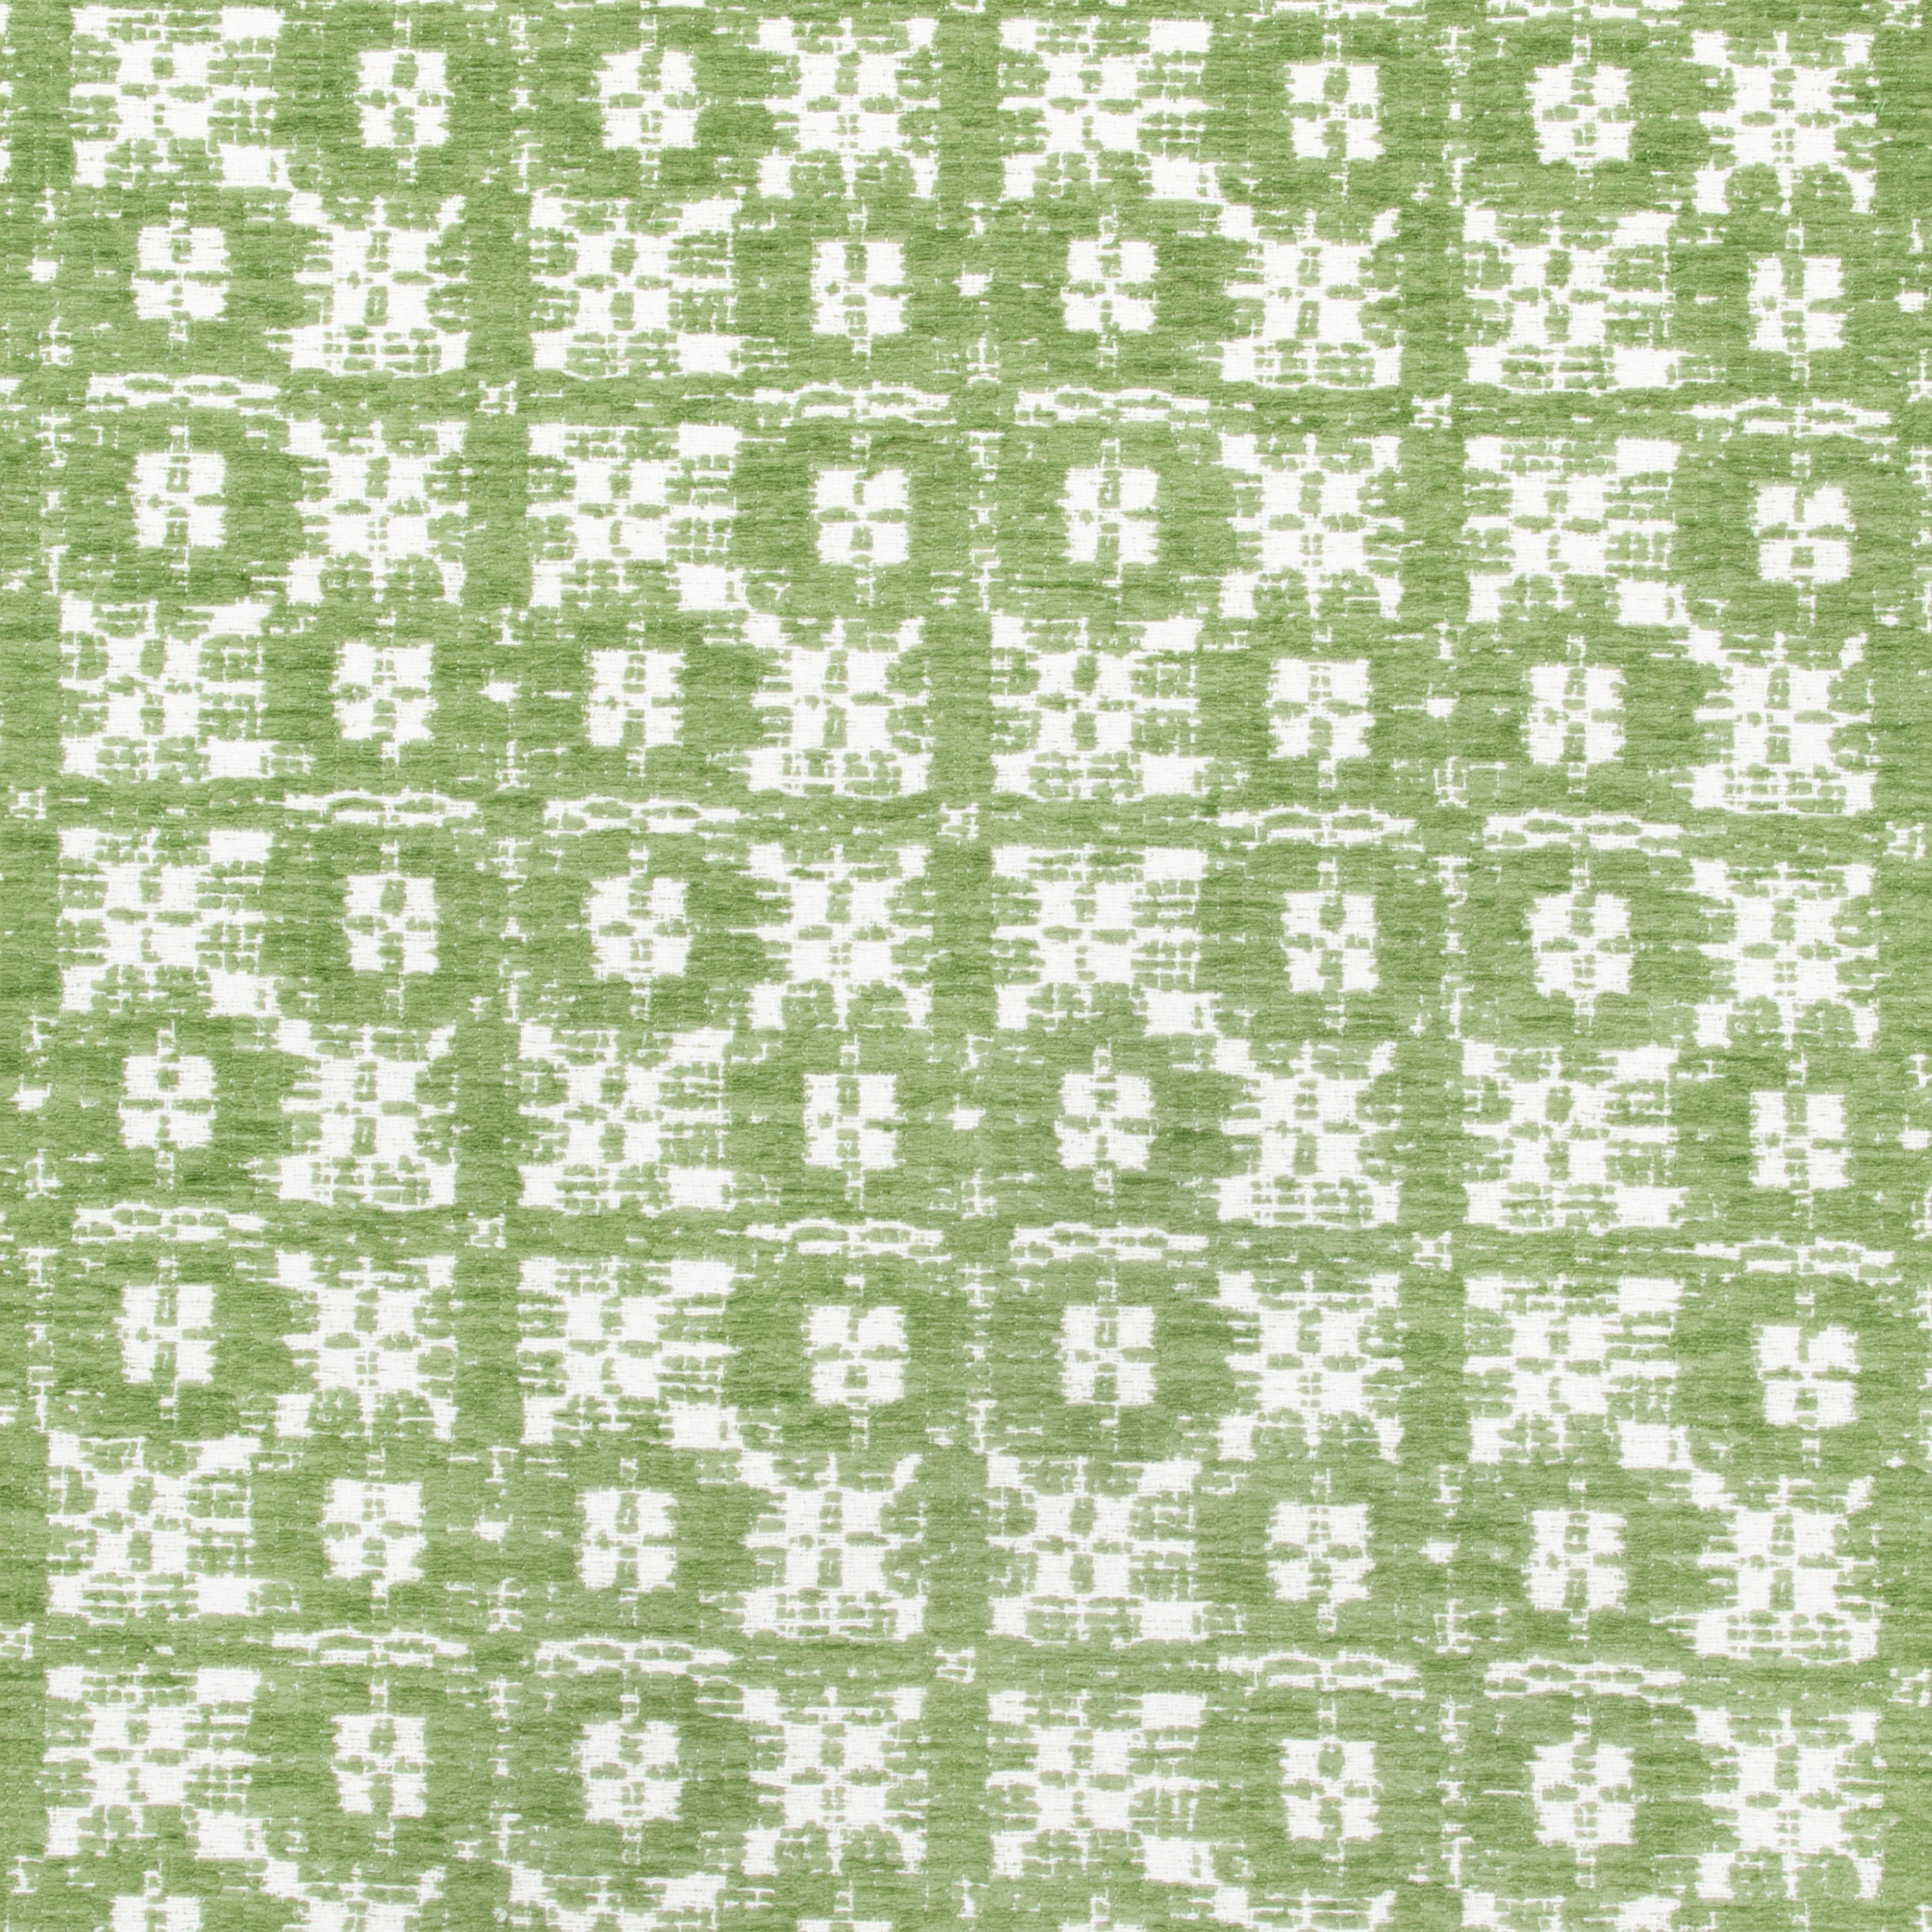 Brimfield fabric in green apple color - pattern number W73500 - by Thibaut in the Landmark collection